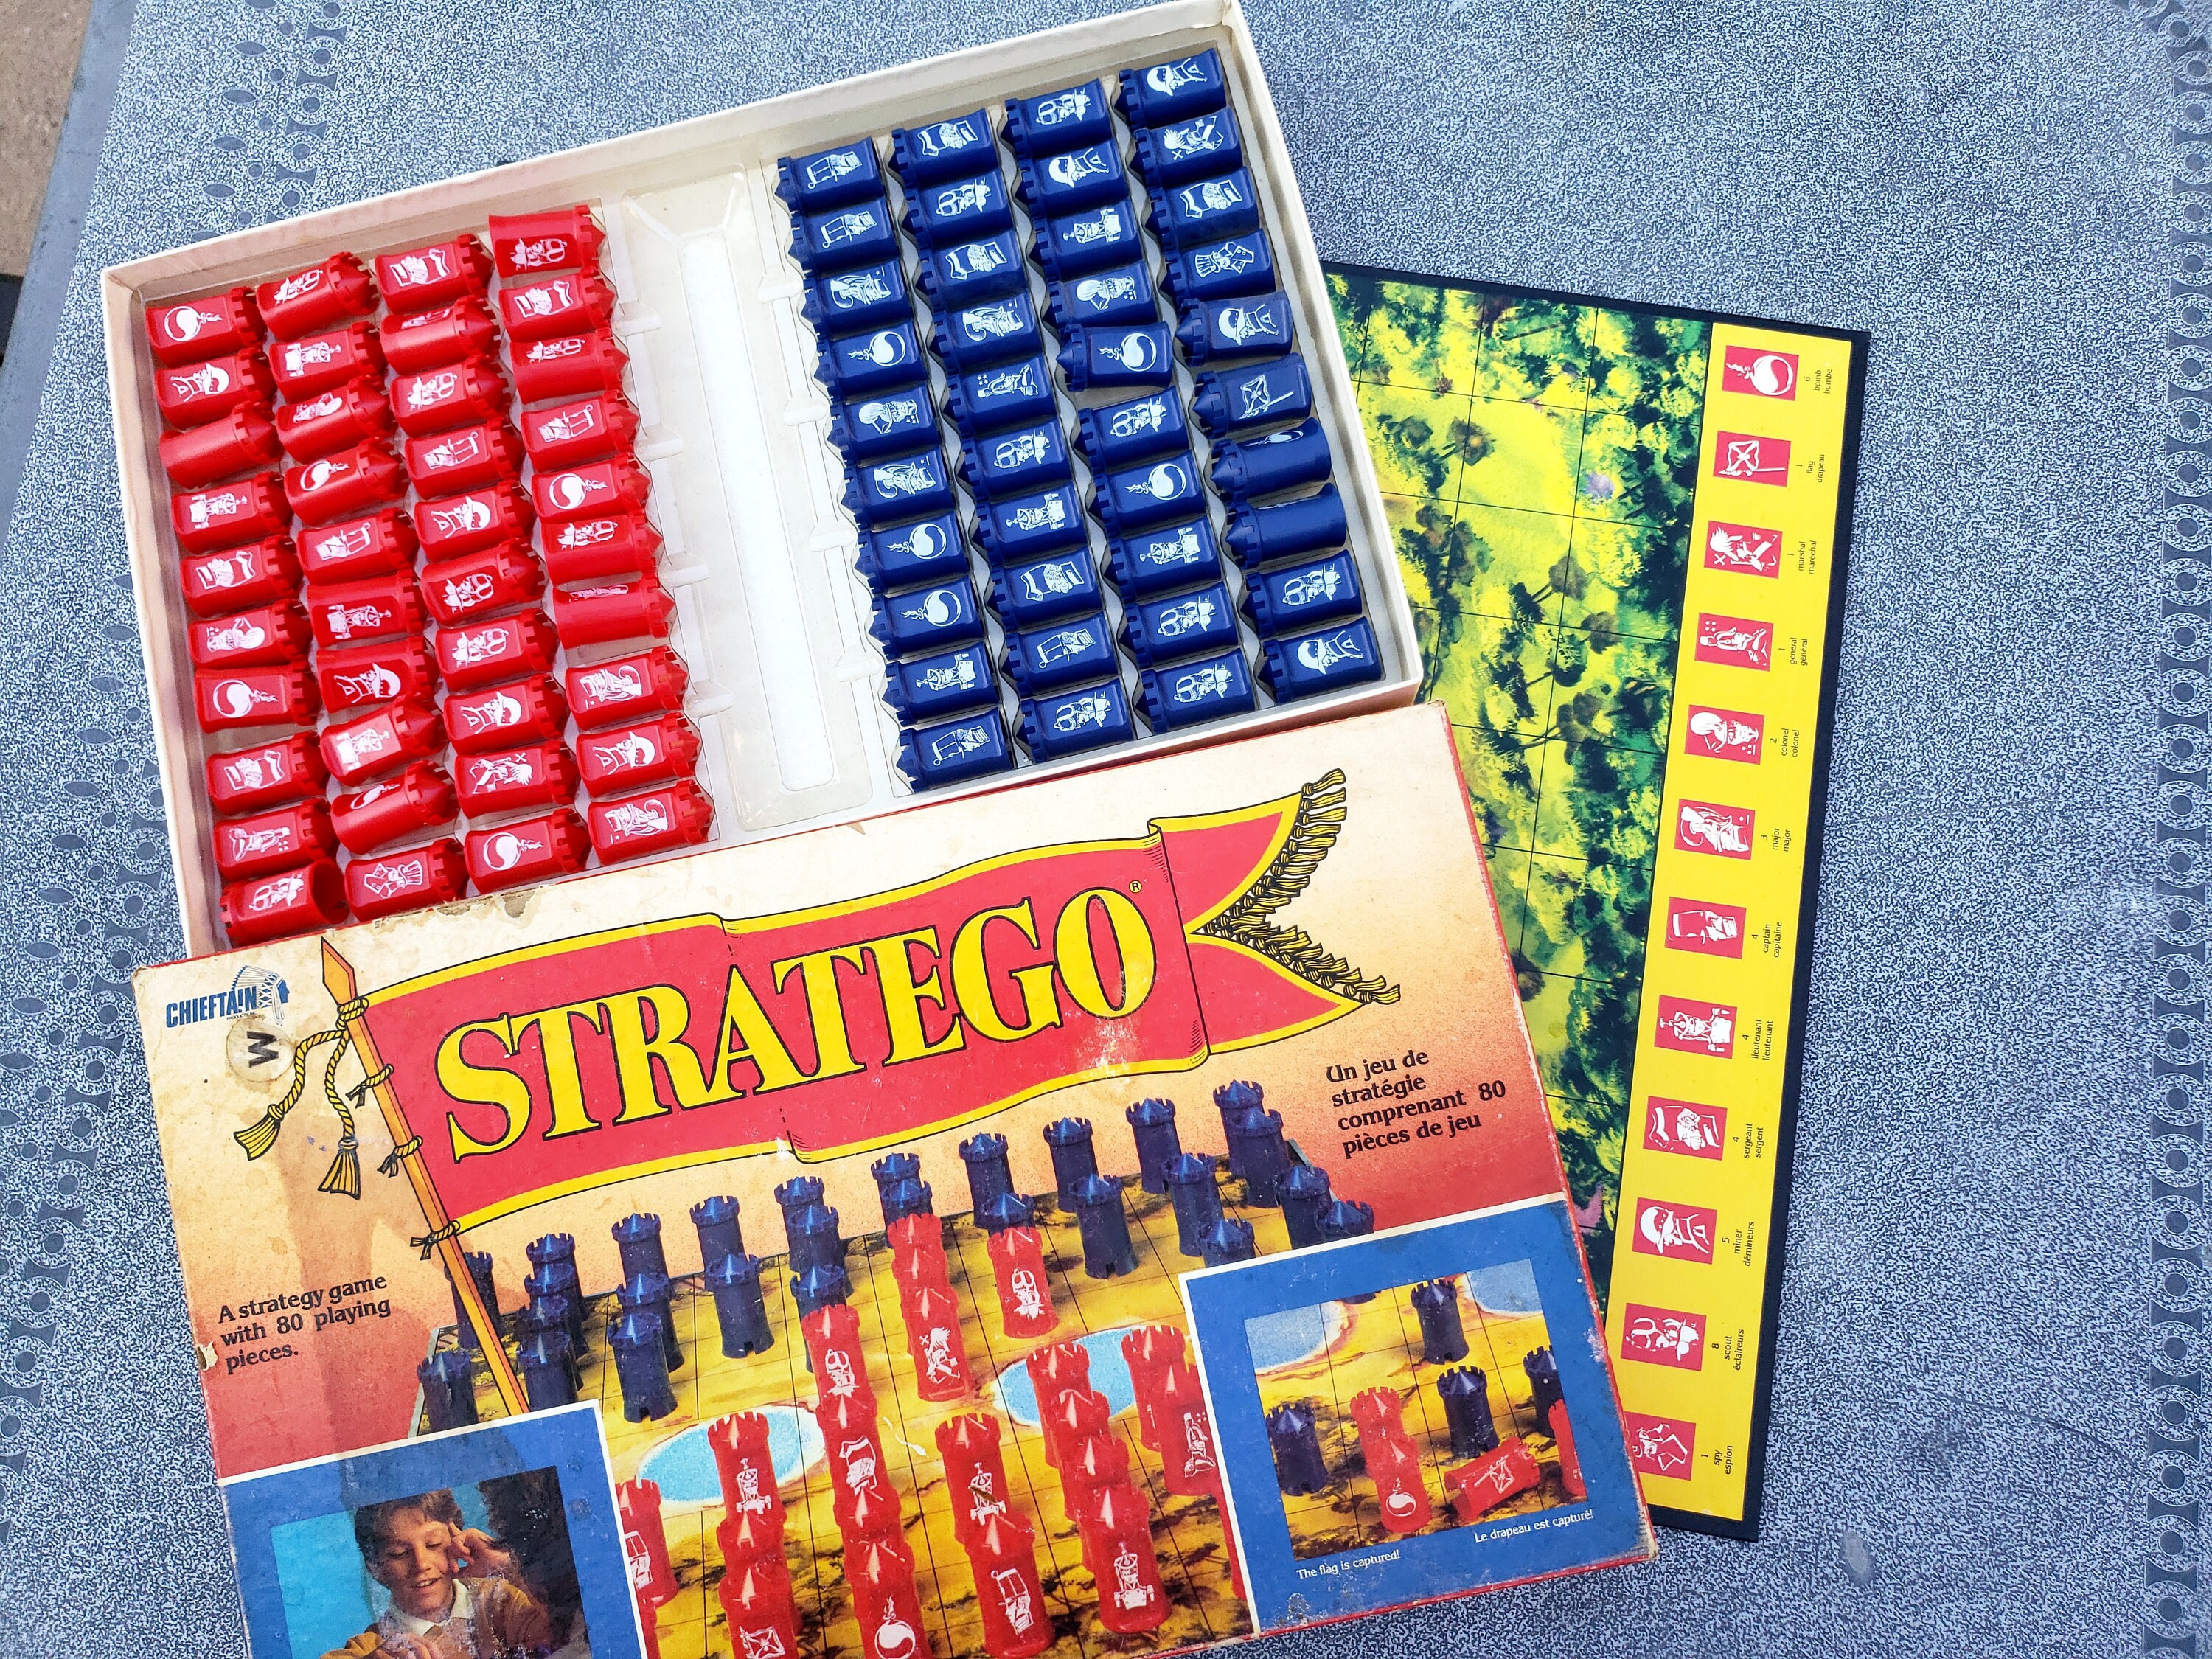 Stratego: 5 Bomb Placement Strategies